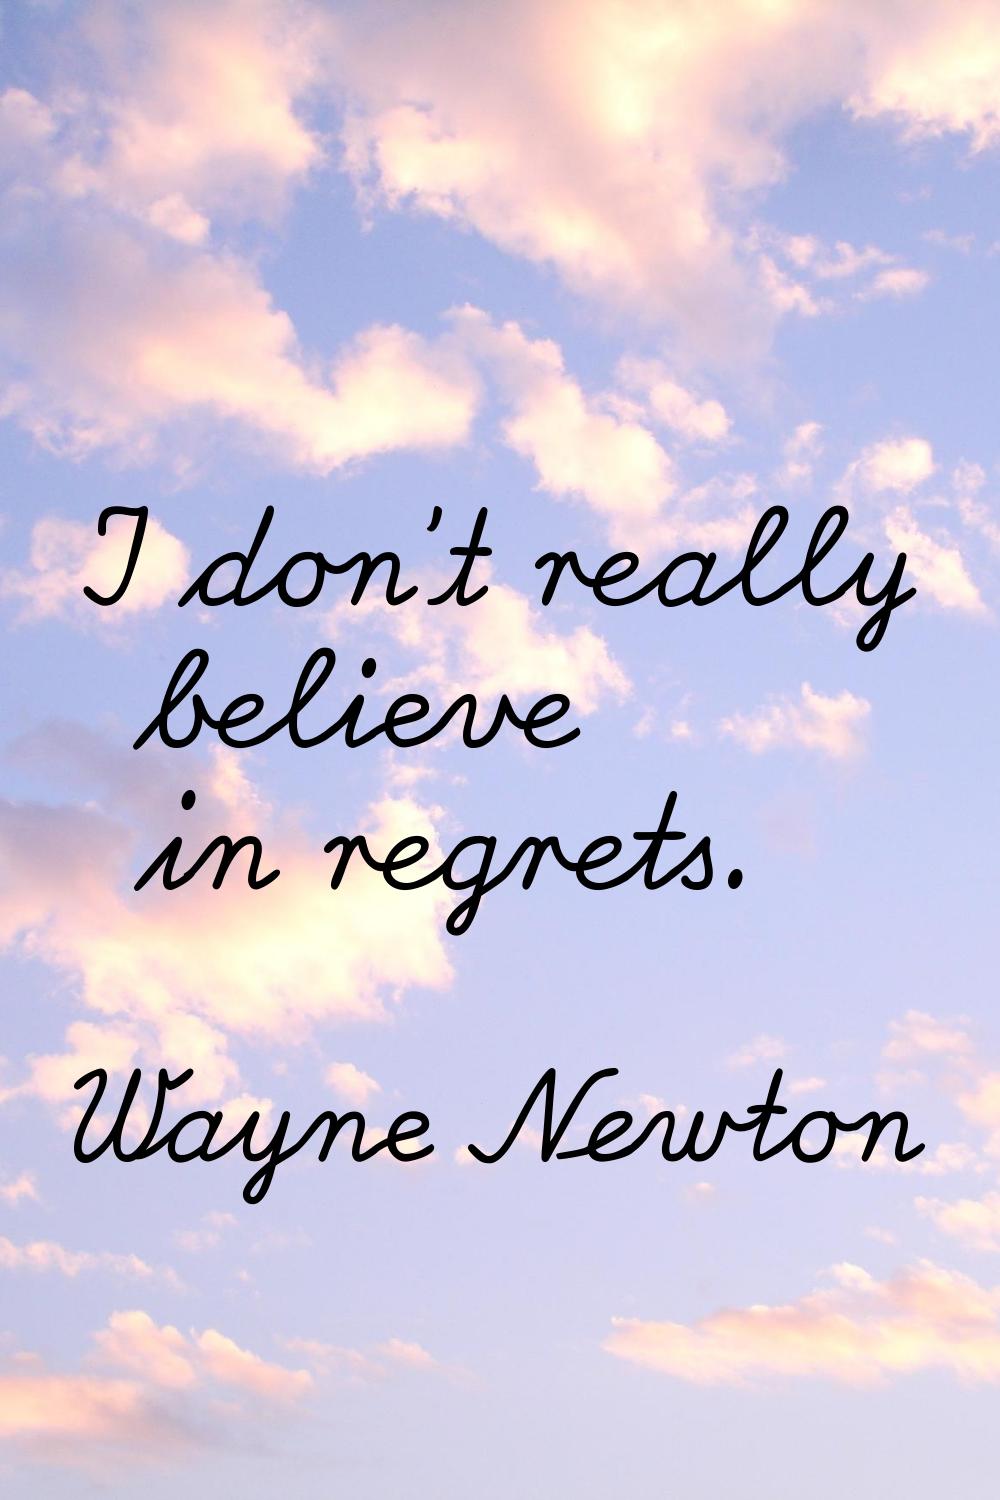 I don't really believe in regrets.